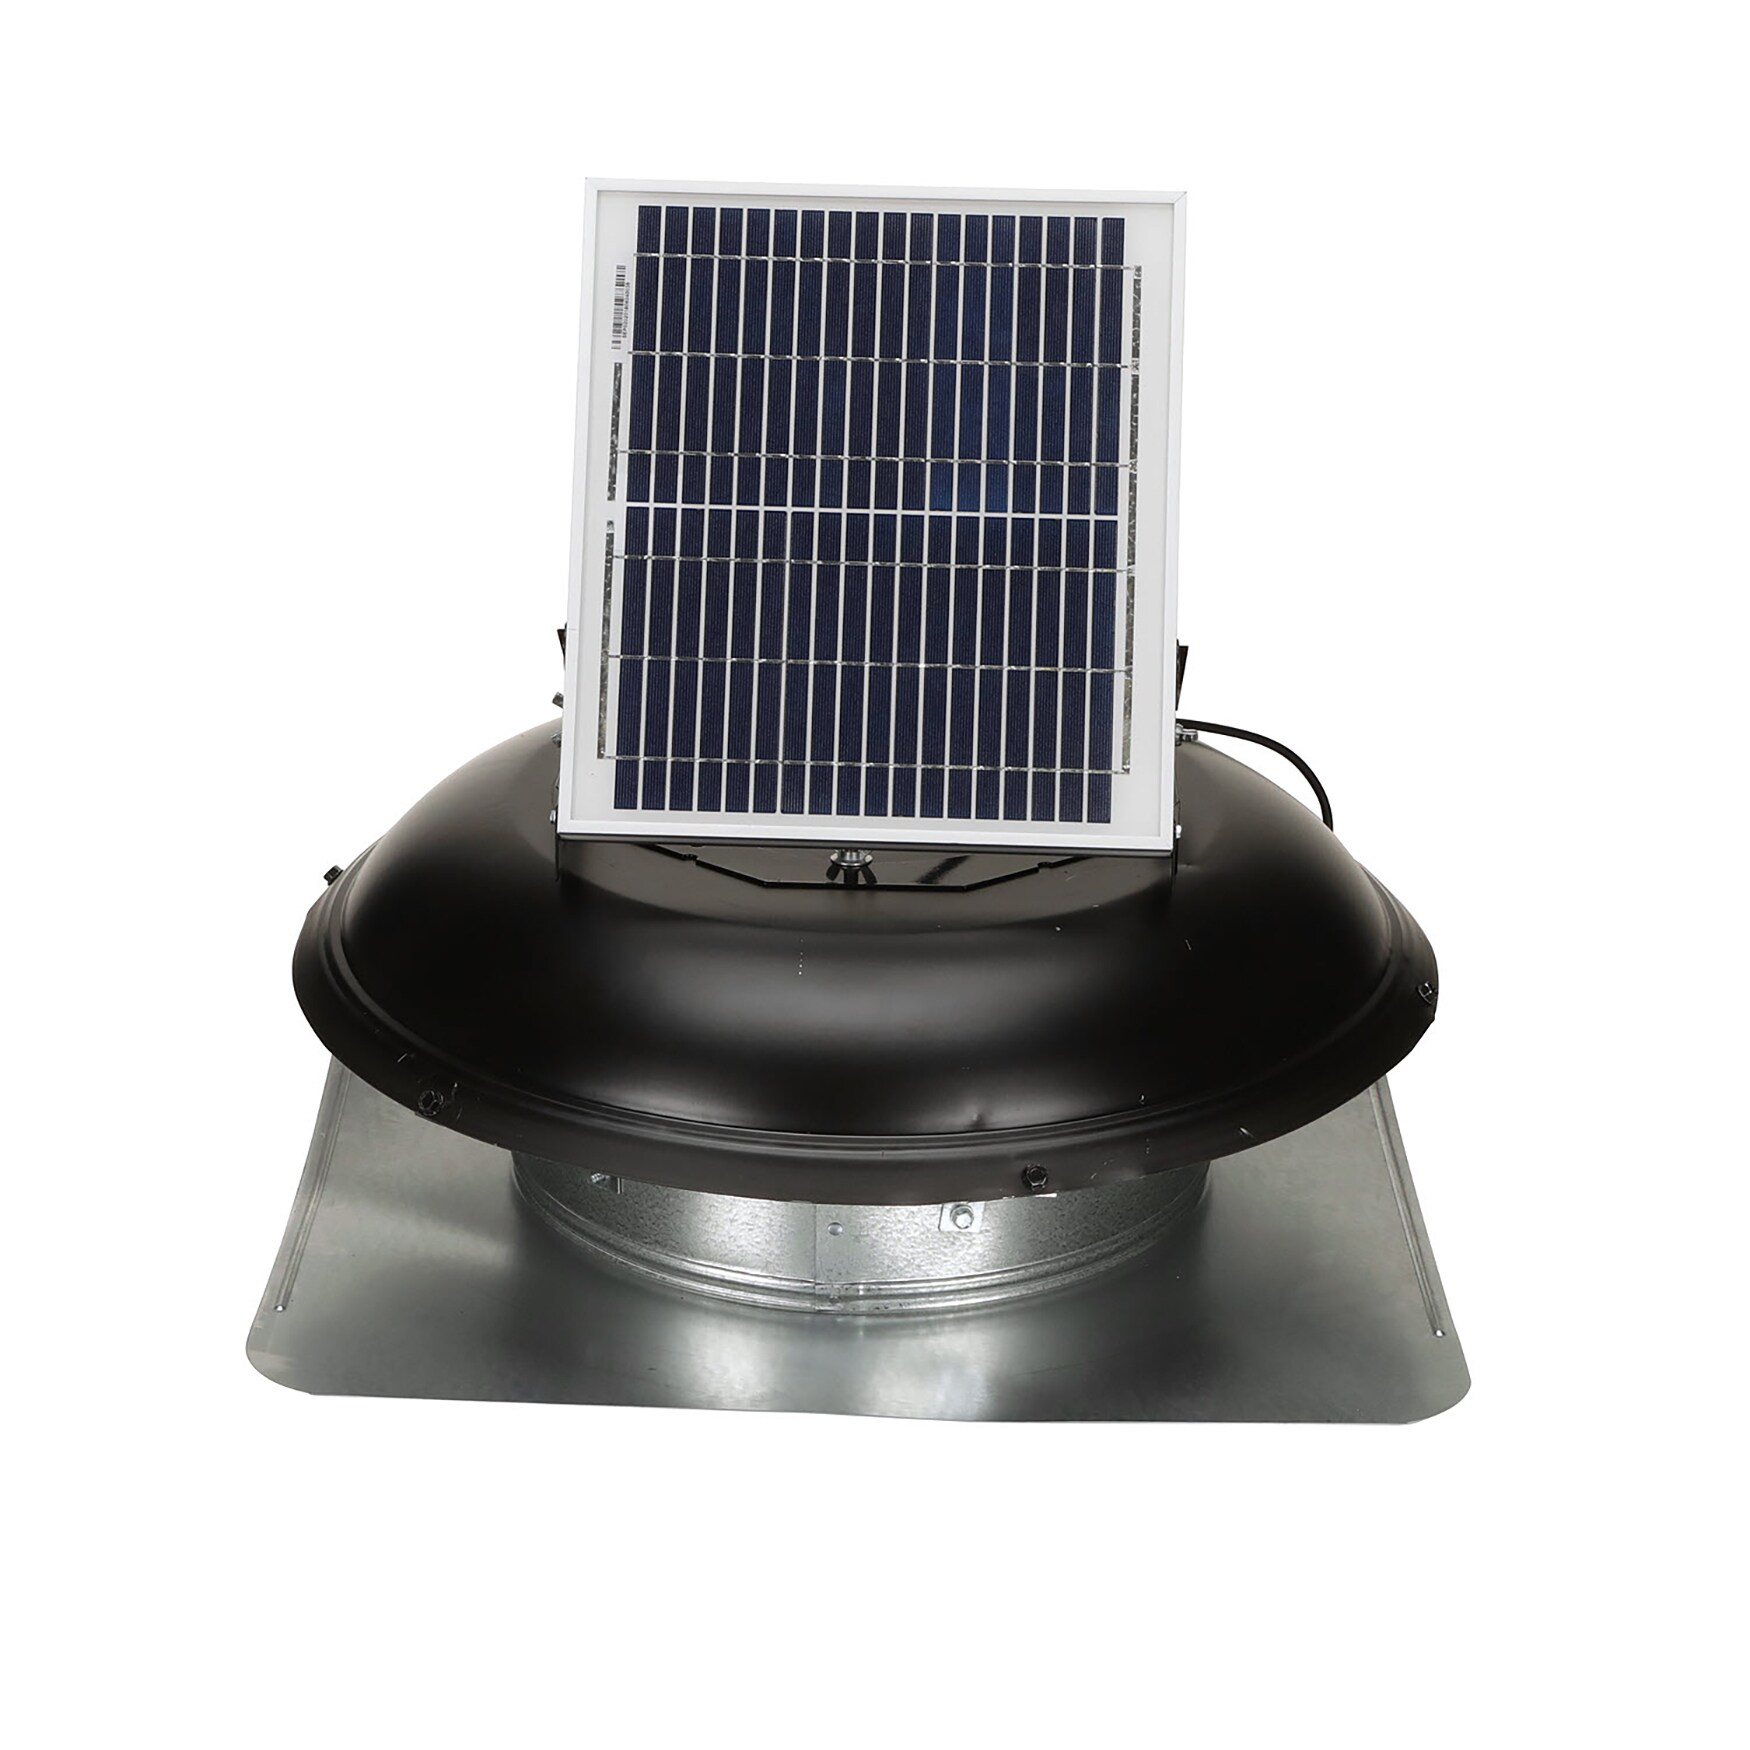 High Flow 1500 CFM Solar Powered Vent Fan Exhaust Air Cooling for Roof Attic 